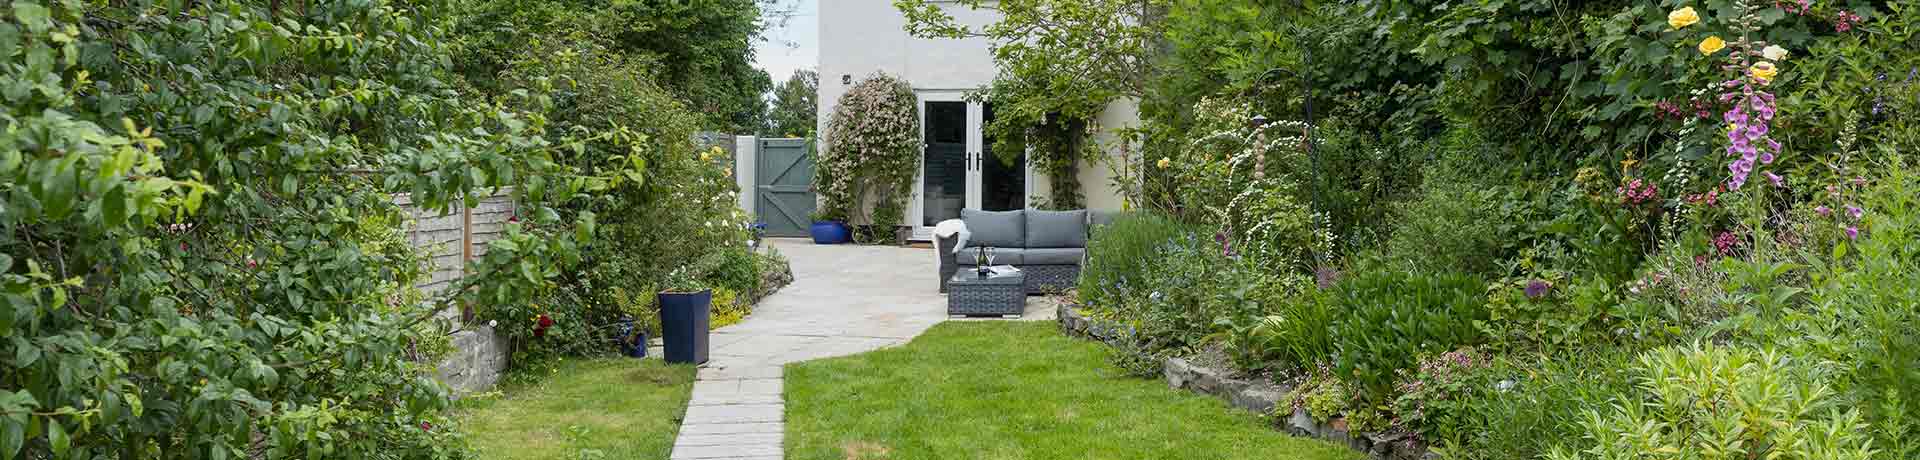 Dog friendly cottages in Somerset with an enclosed garden.